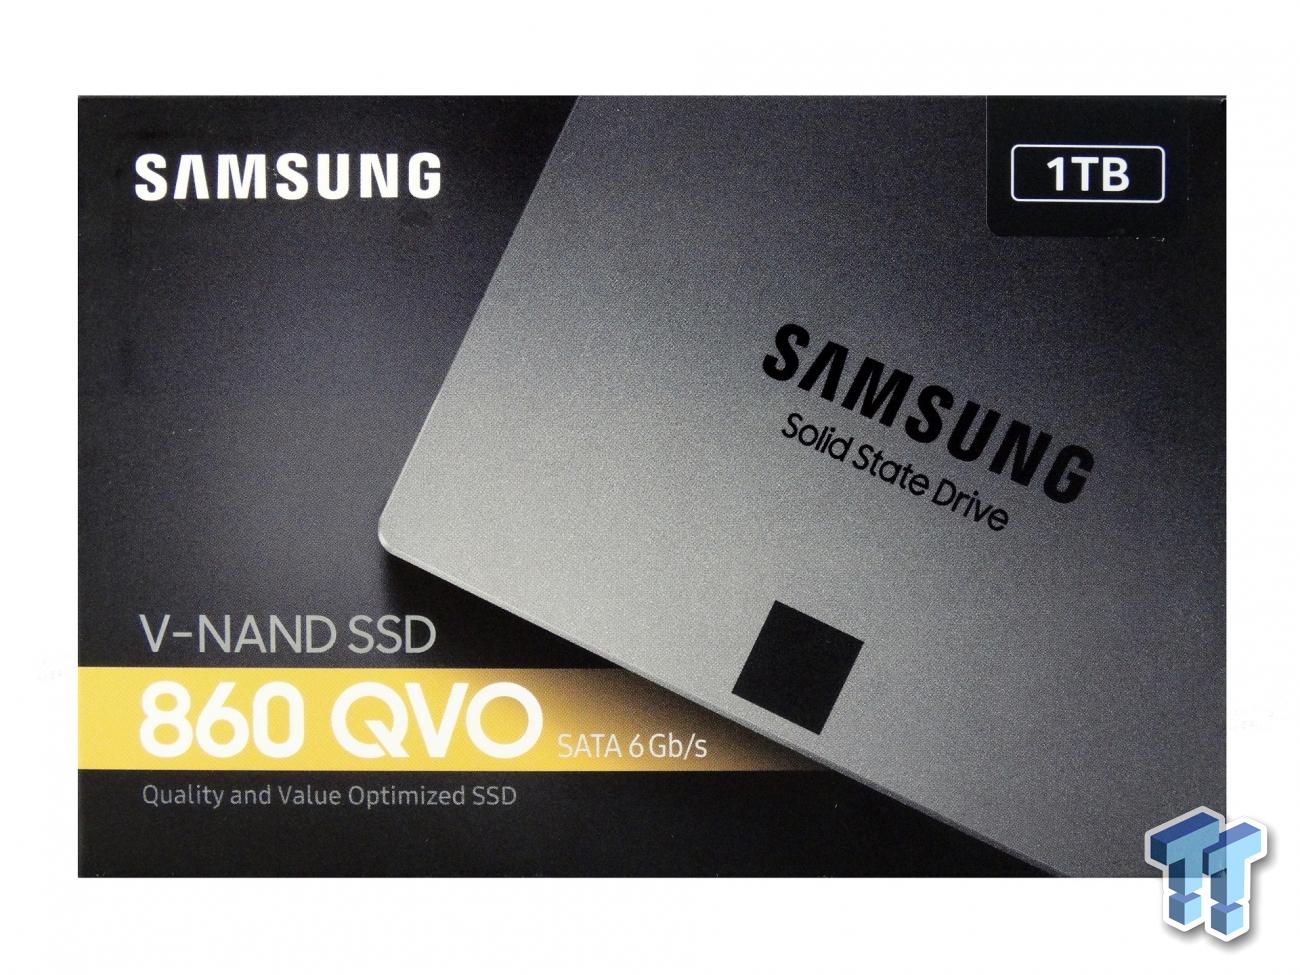 Samsung SSD 1 TB 860 QVO 550MB/s Read 520MB/s Write Solid State Drive New ct 